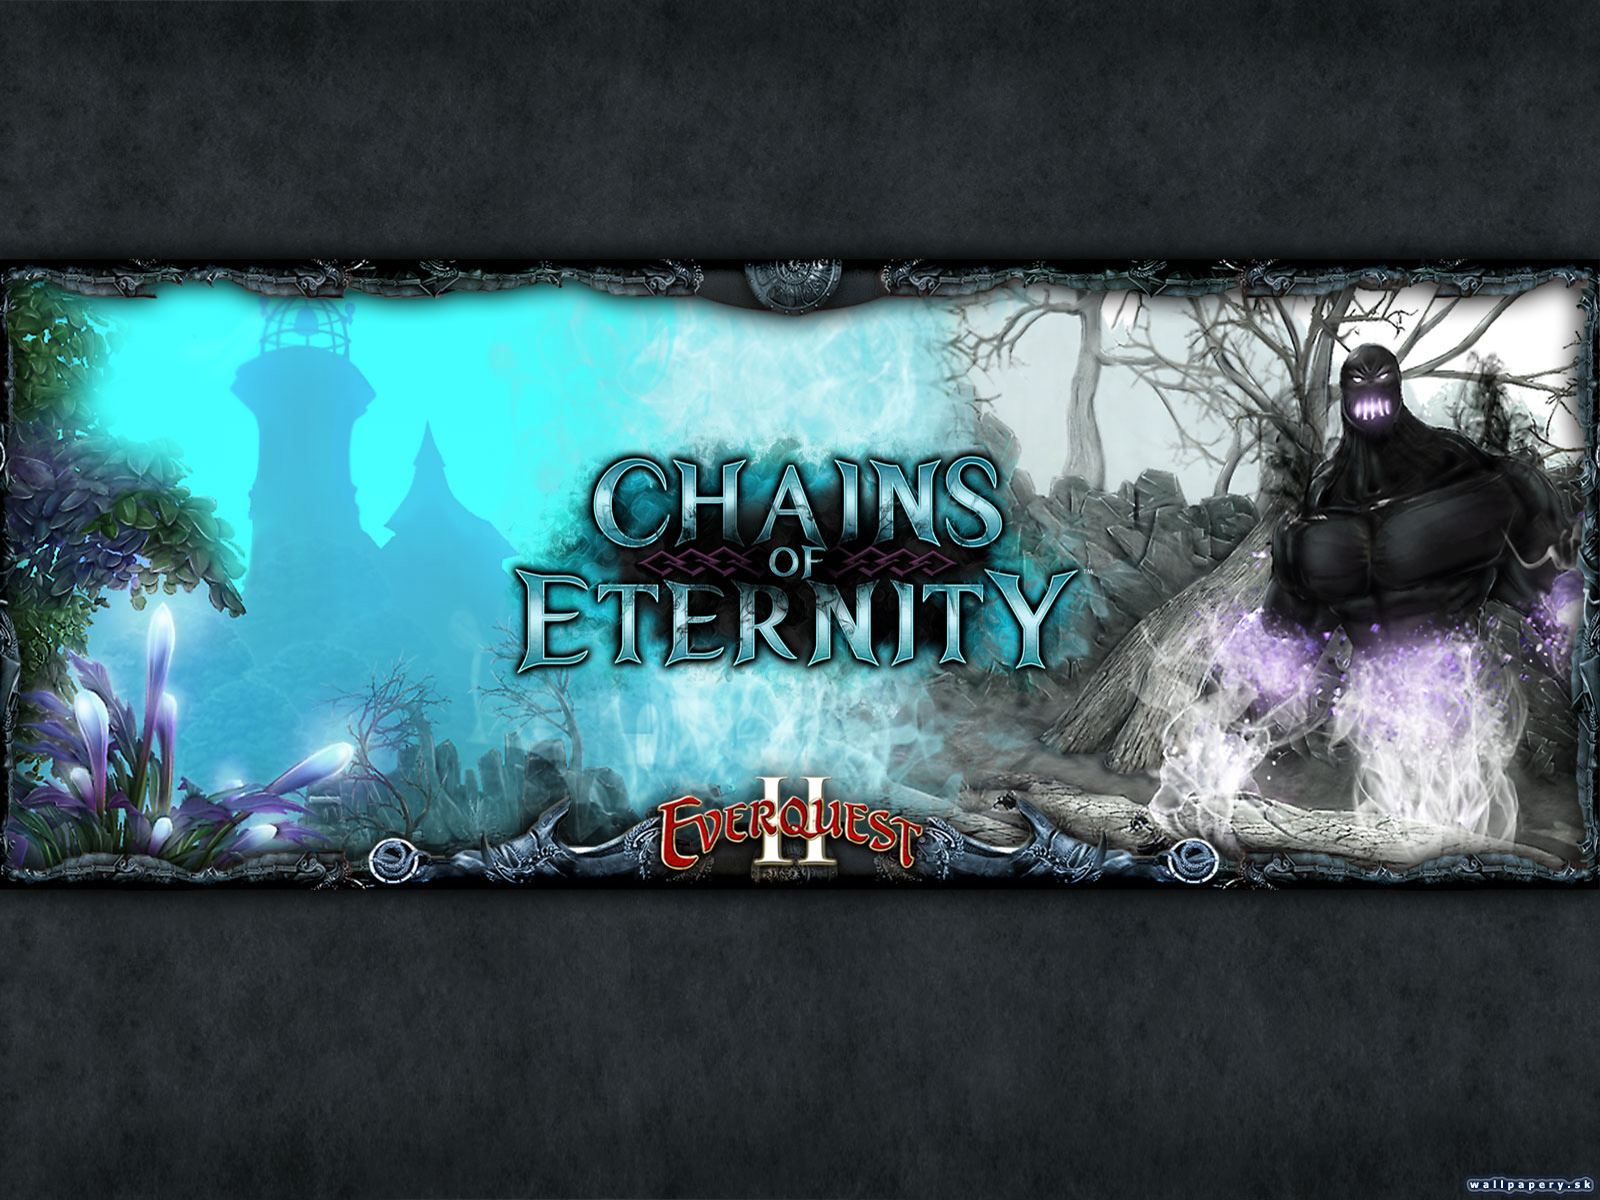 EverQuest 2: Chains of Eternity - wallpaper 1